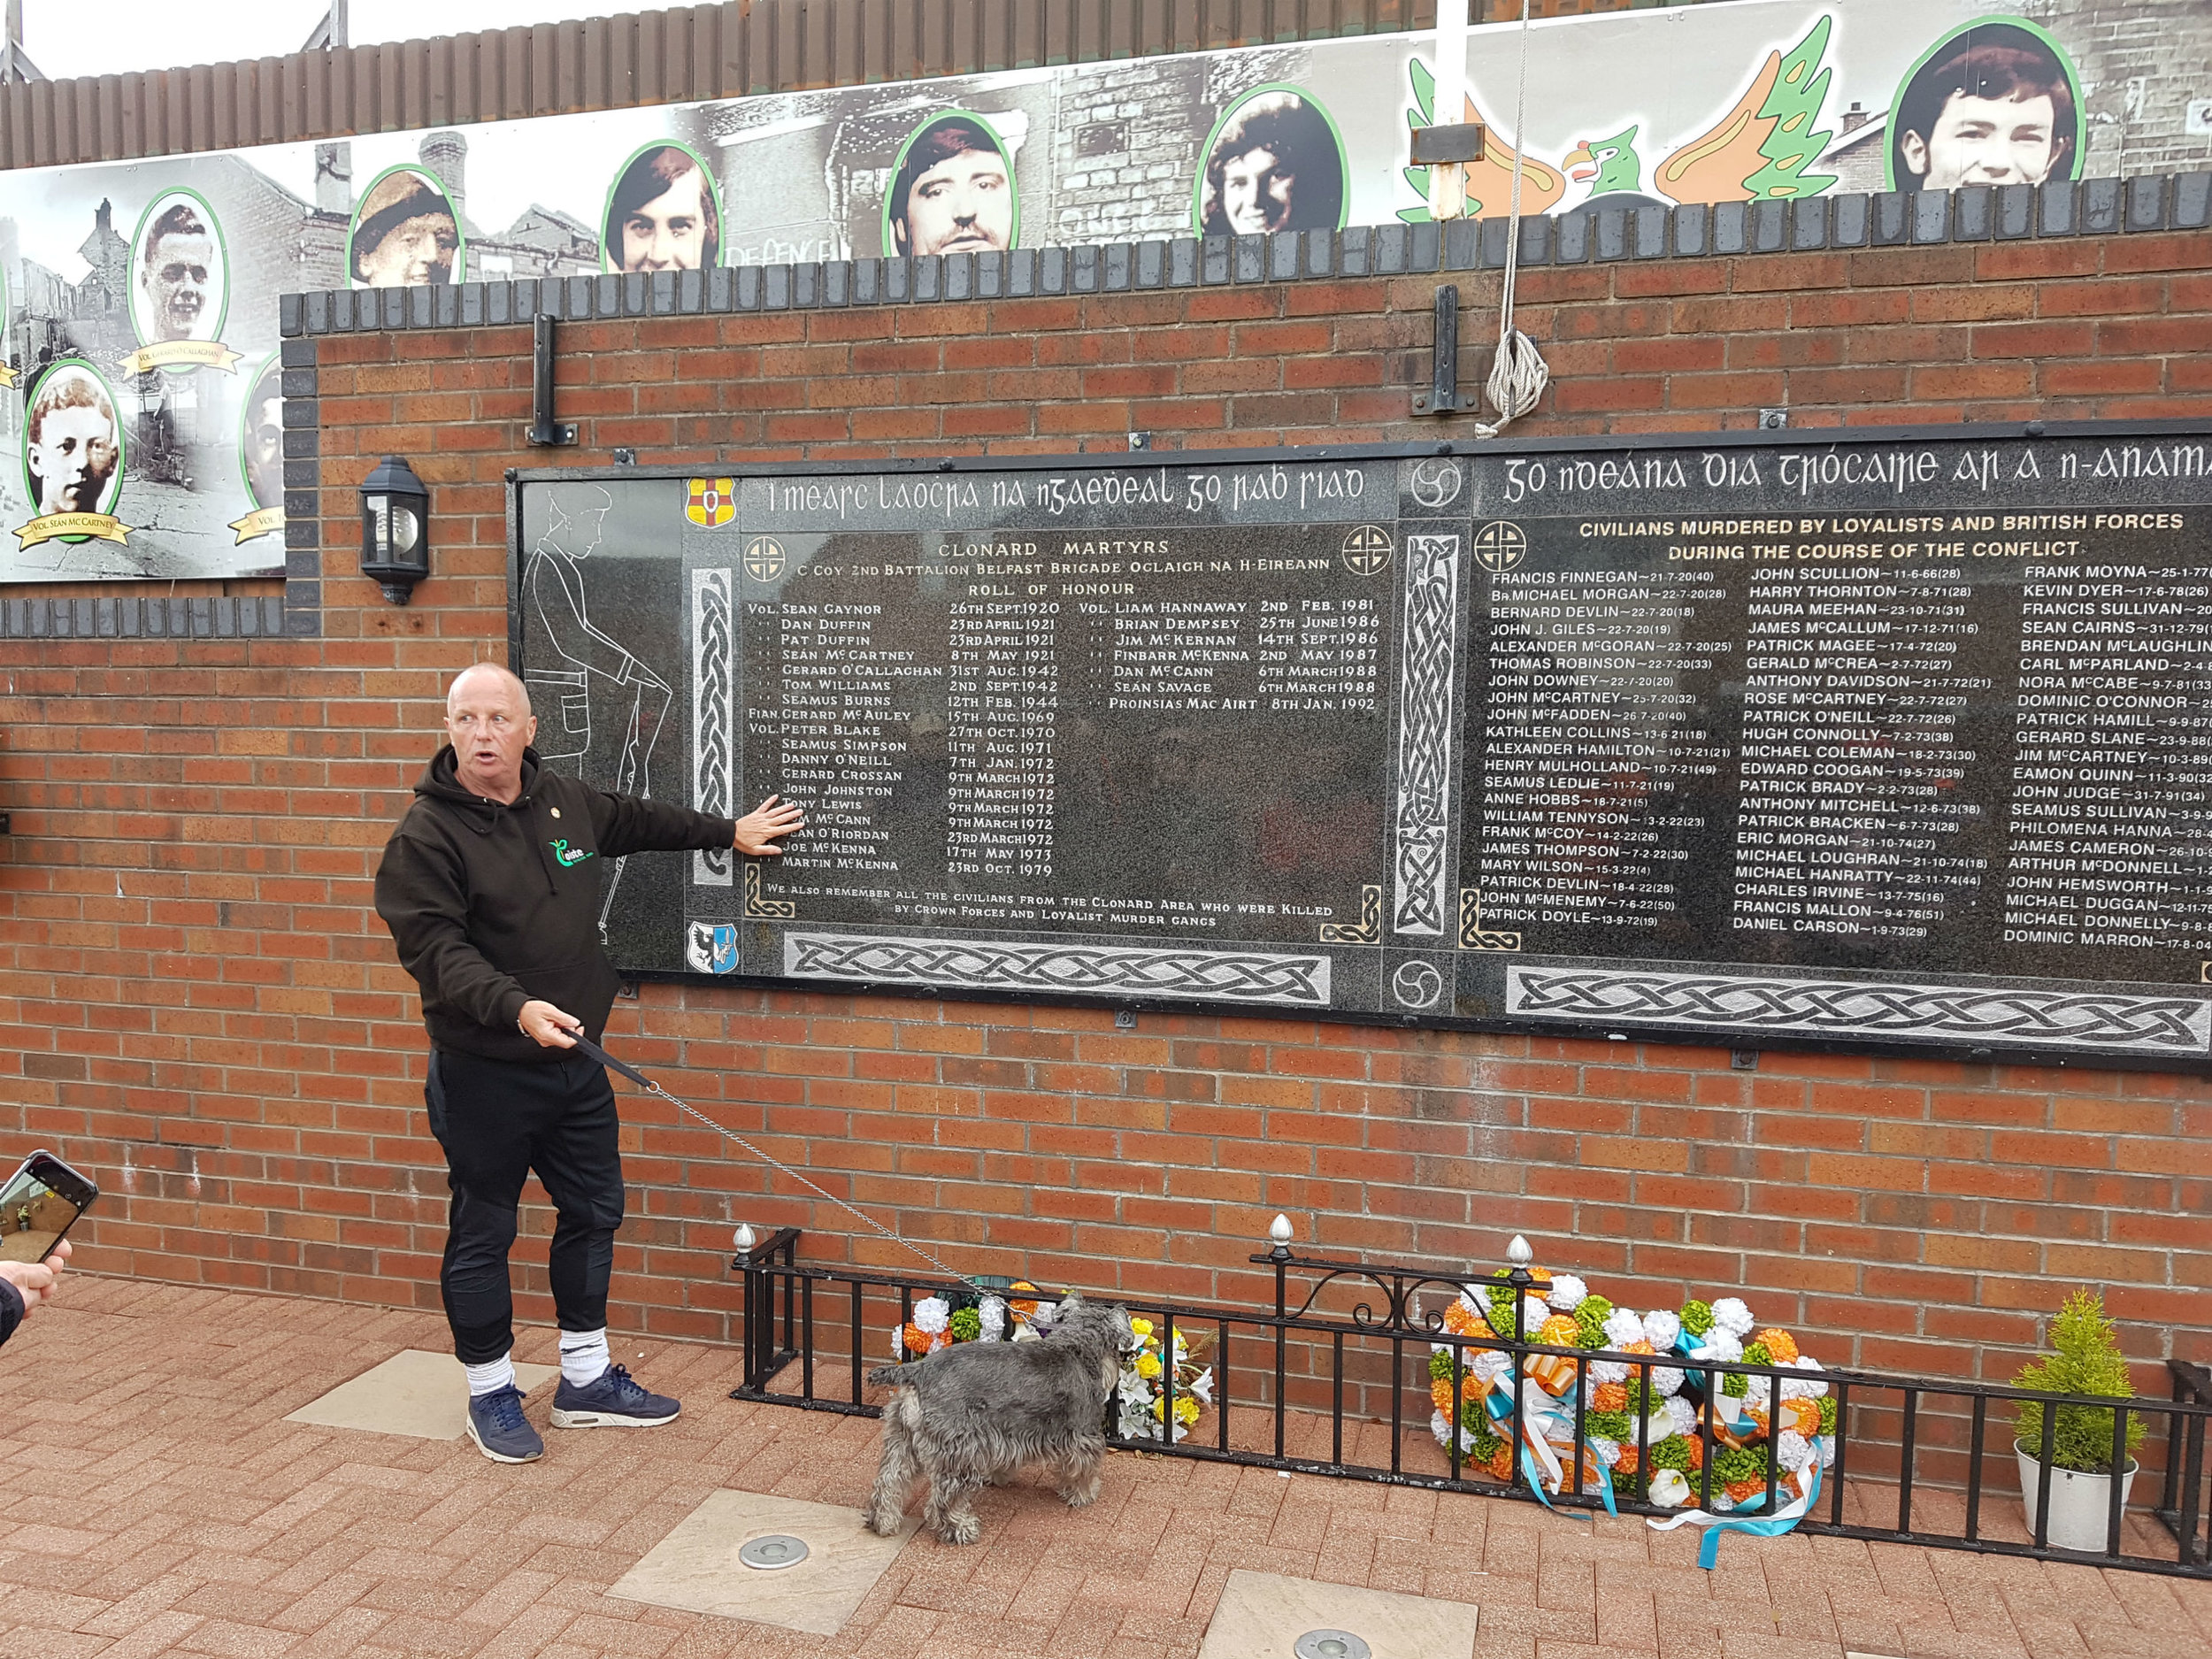 Our guide explaining a memorial for IRA fighters and civilians